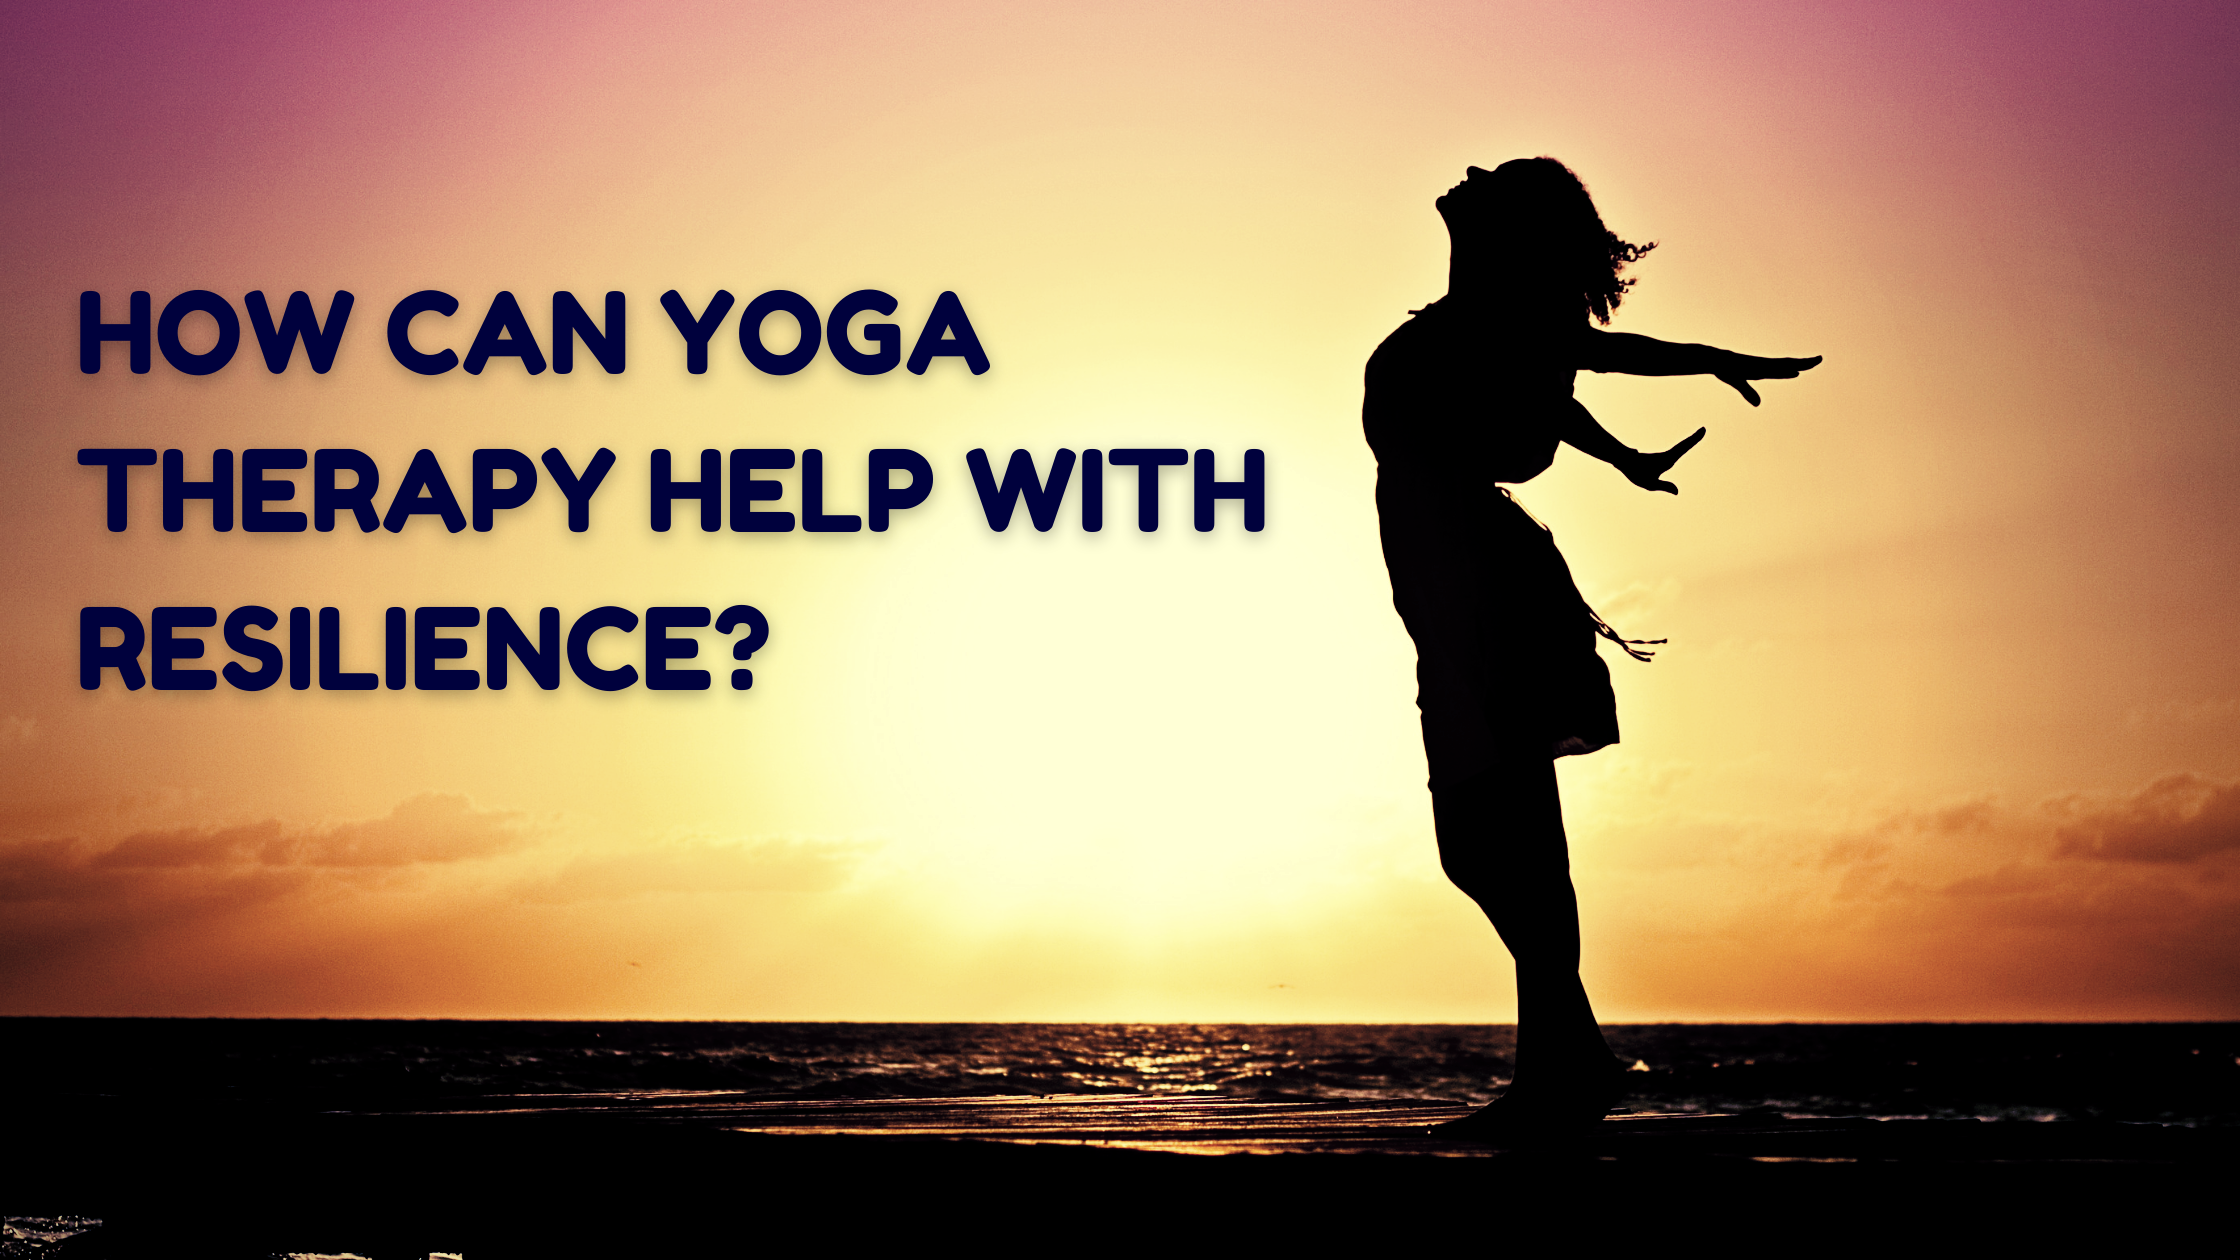 How Can Yoga Therapy Help with Resilience